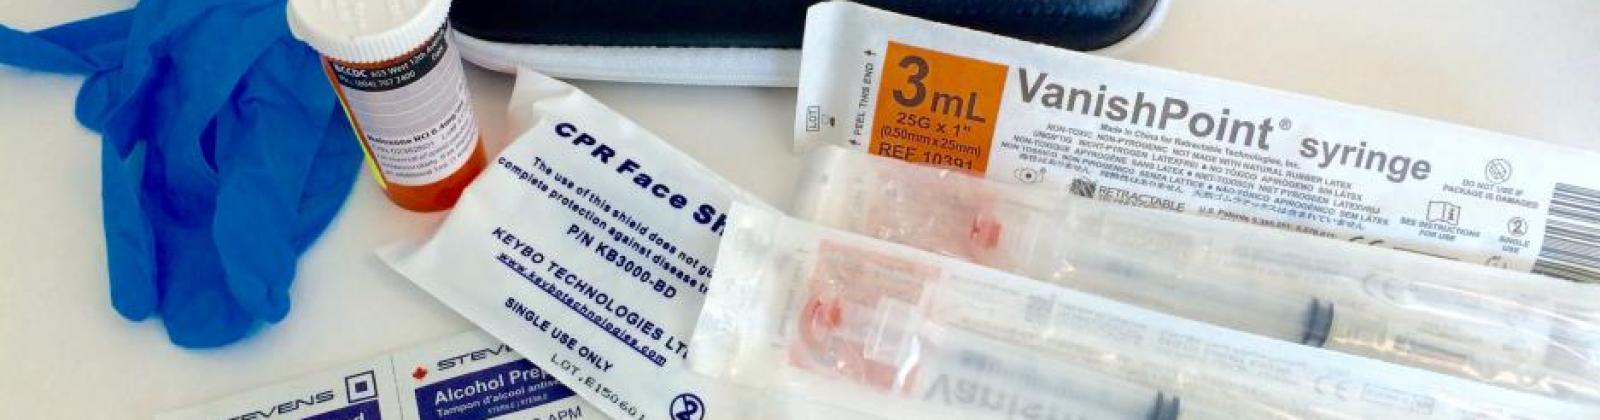 Take-home naloxone kits are available free of charge for those at risk of an opioid overdose.